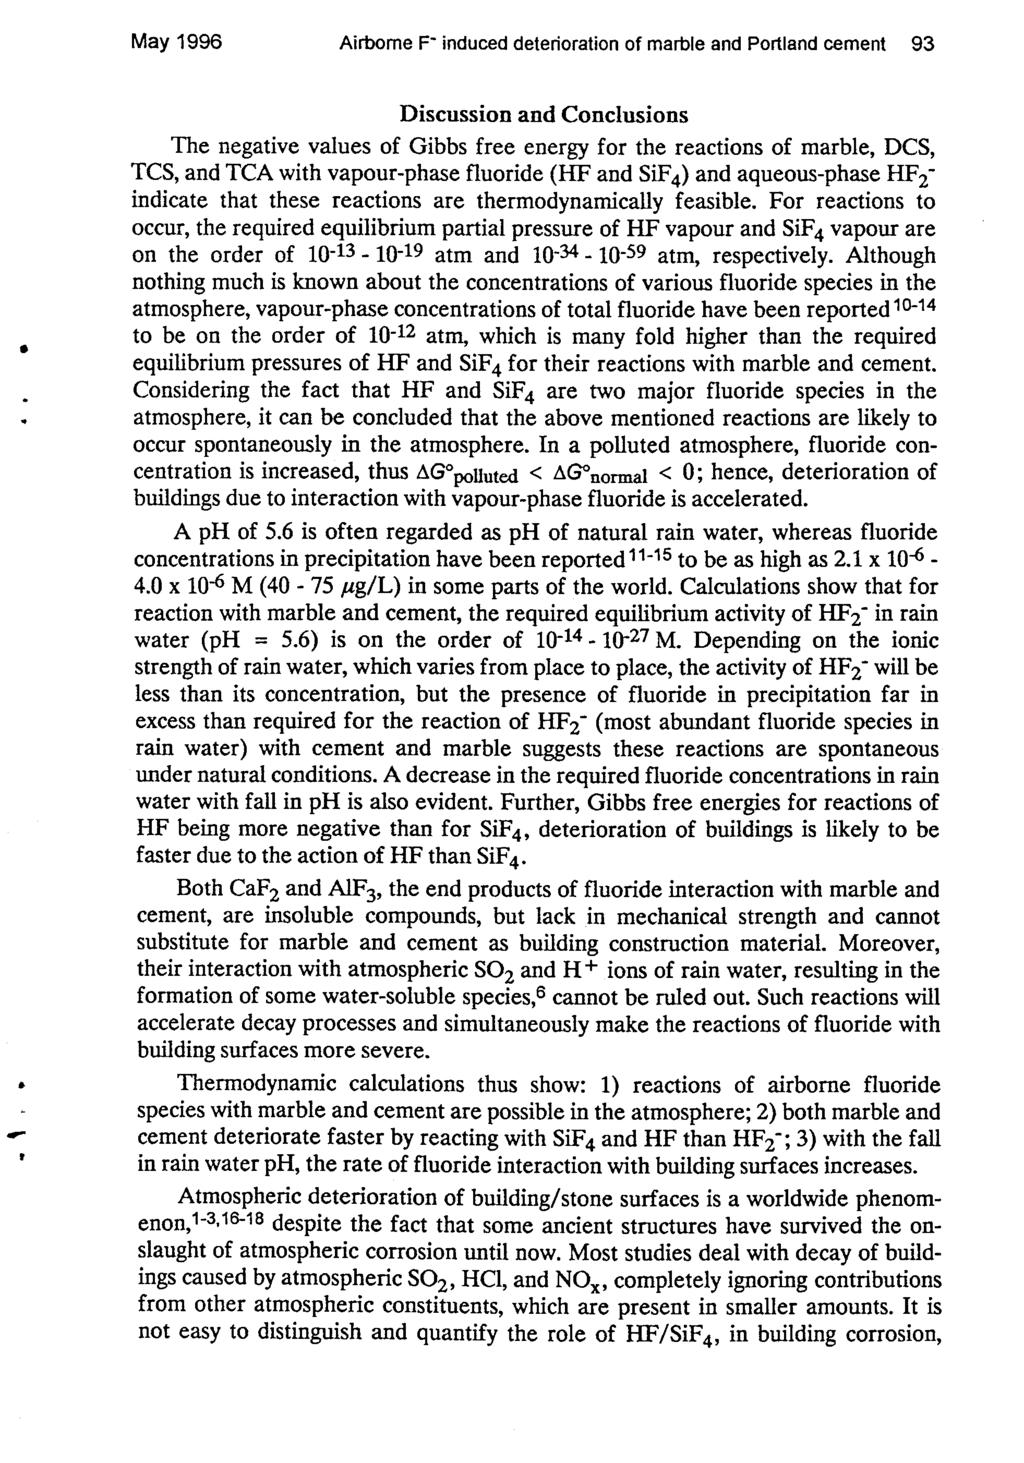 May 1996 Airborne r induced deterioration of marble and Portland cement 93 Discussion and Conclusions The negative values of Gibbs free energy for the reactions of marble, DCS, TCS, and TCA with